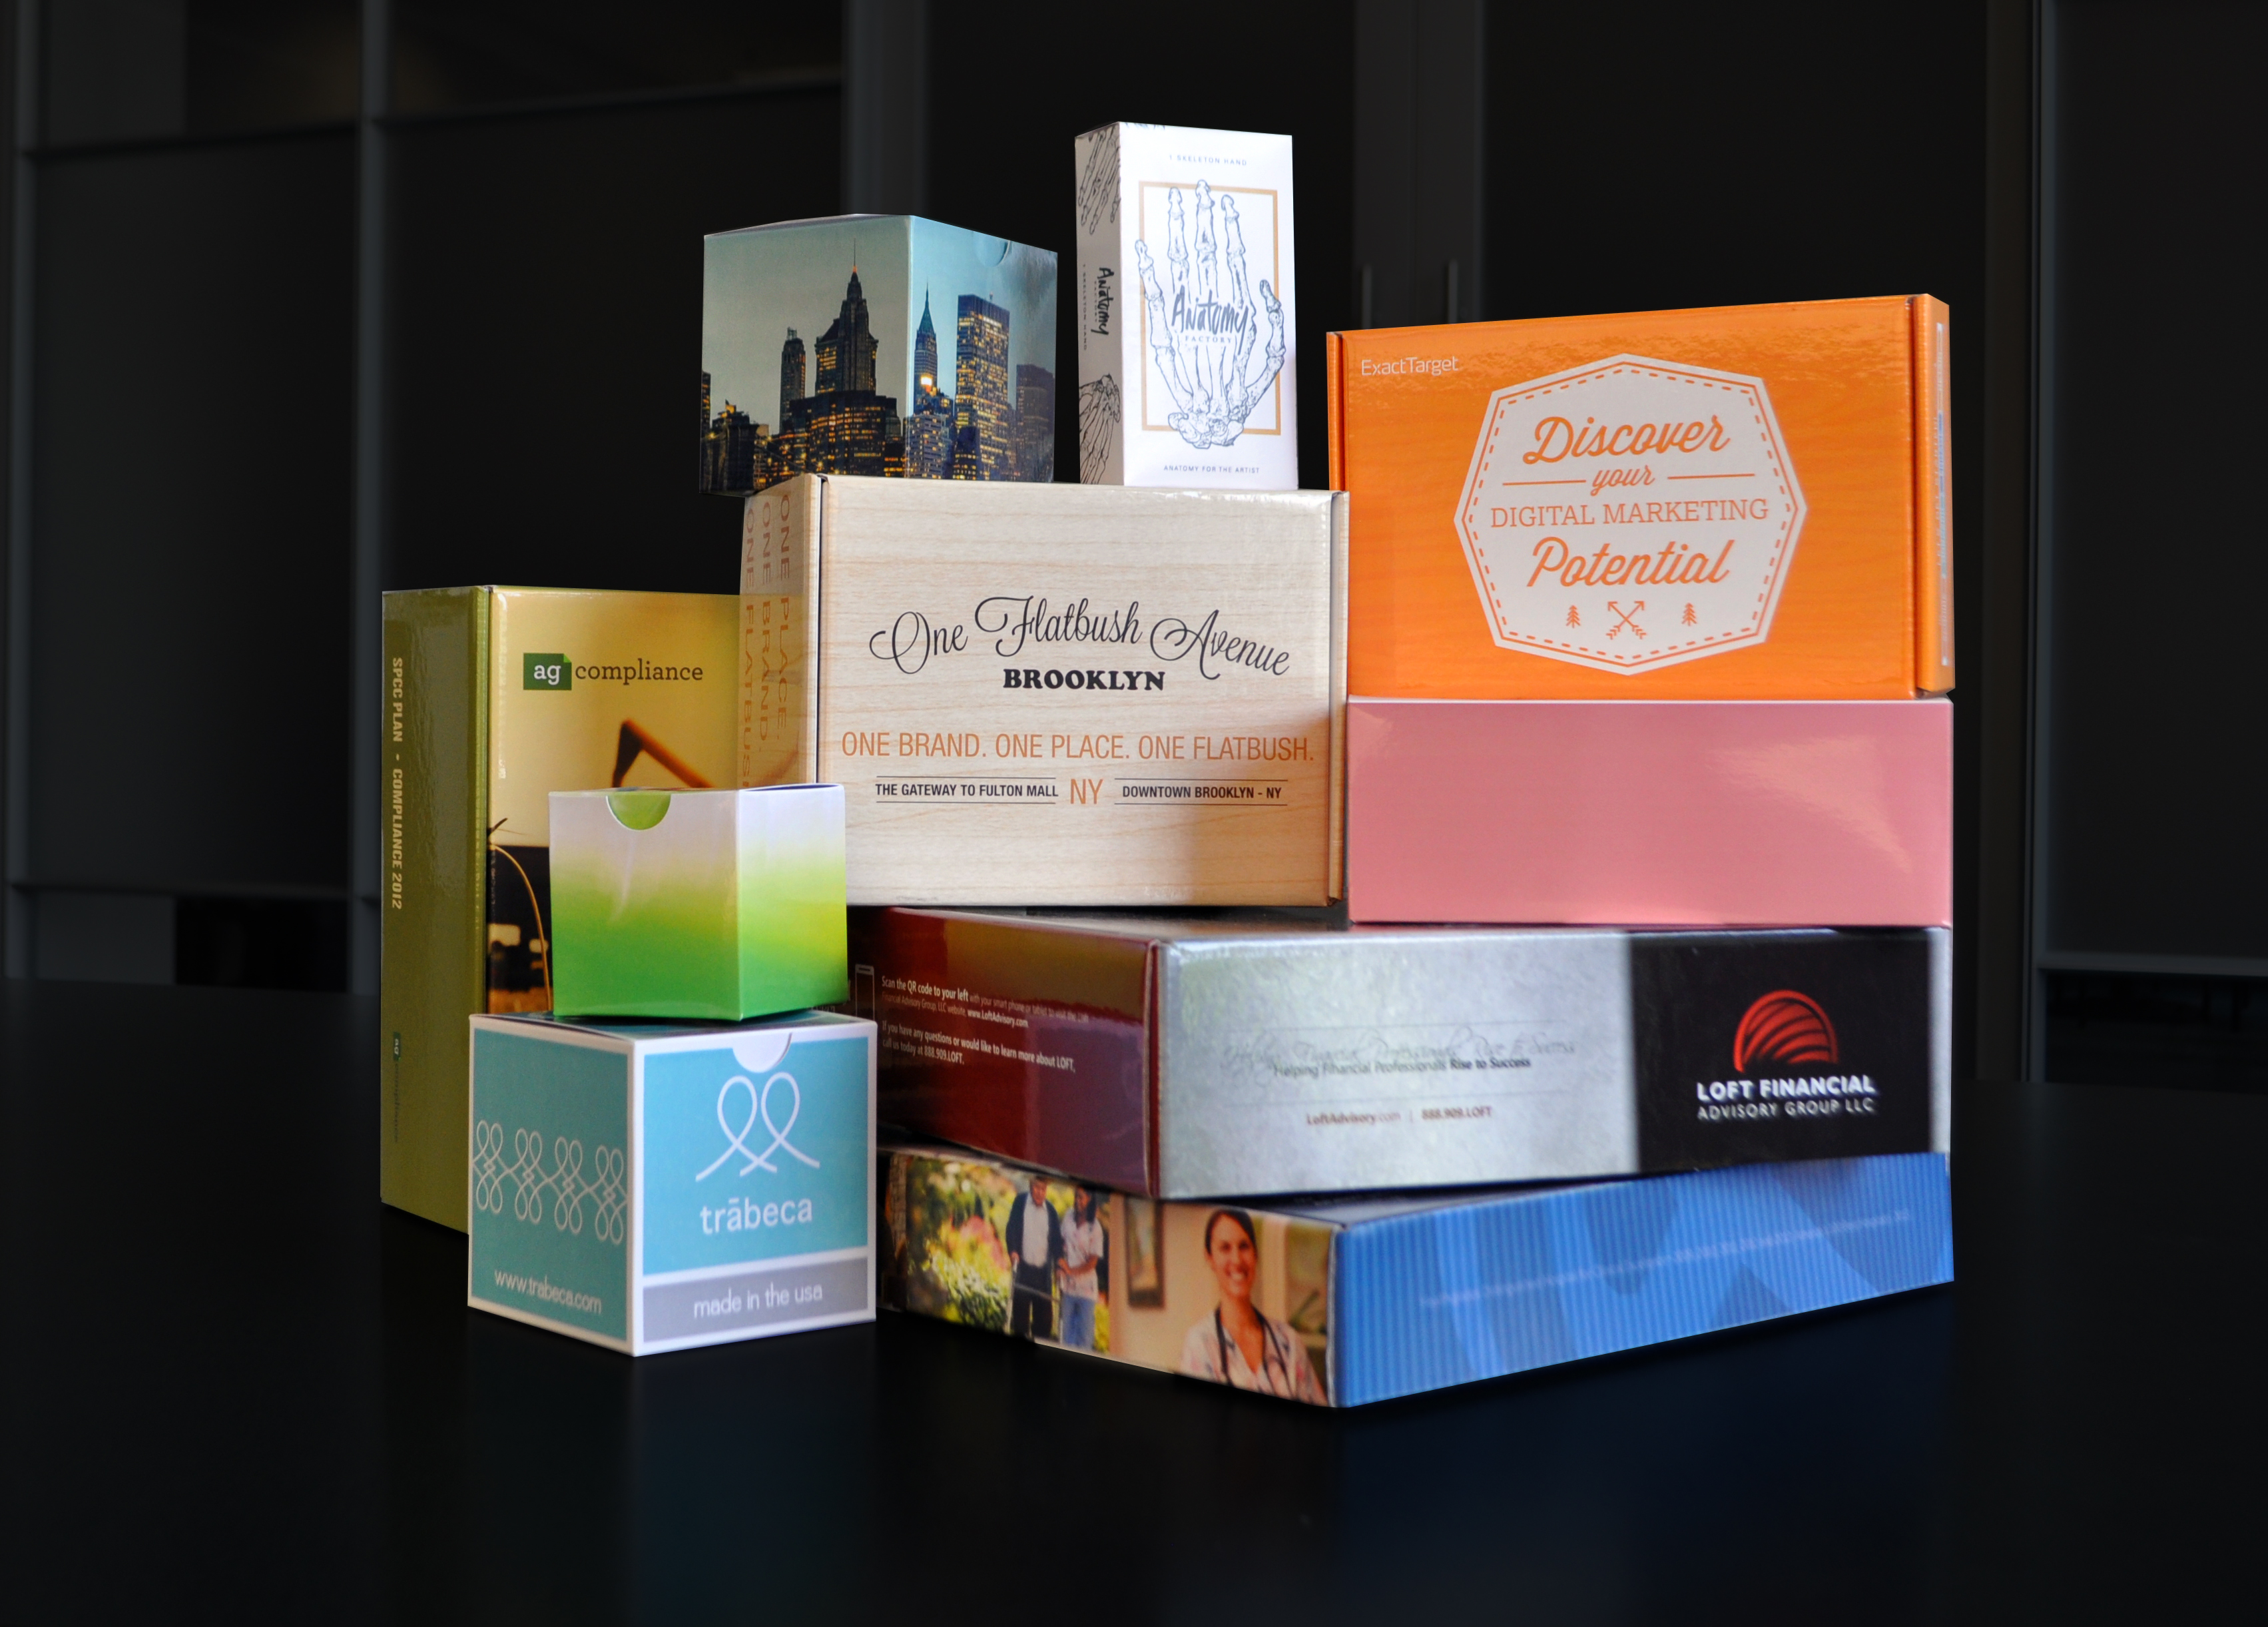 ThePaperWorker now offers over 100 styles of custom boxes, including a Create Your Own Size Custom Box option as well as an oversize custom box option.